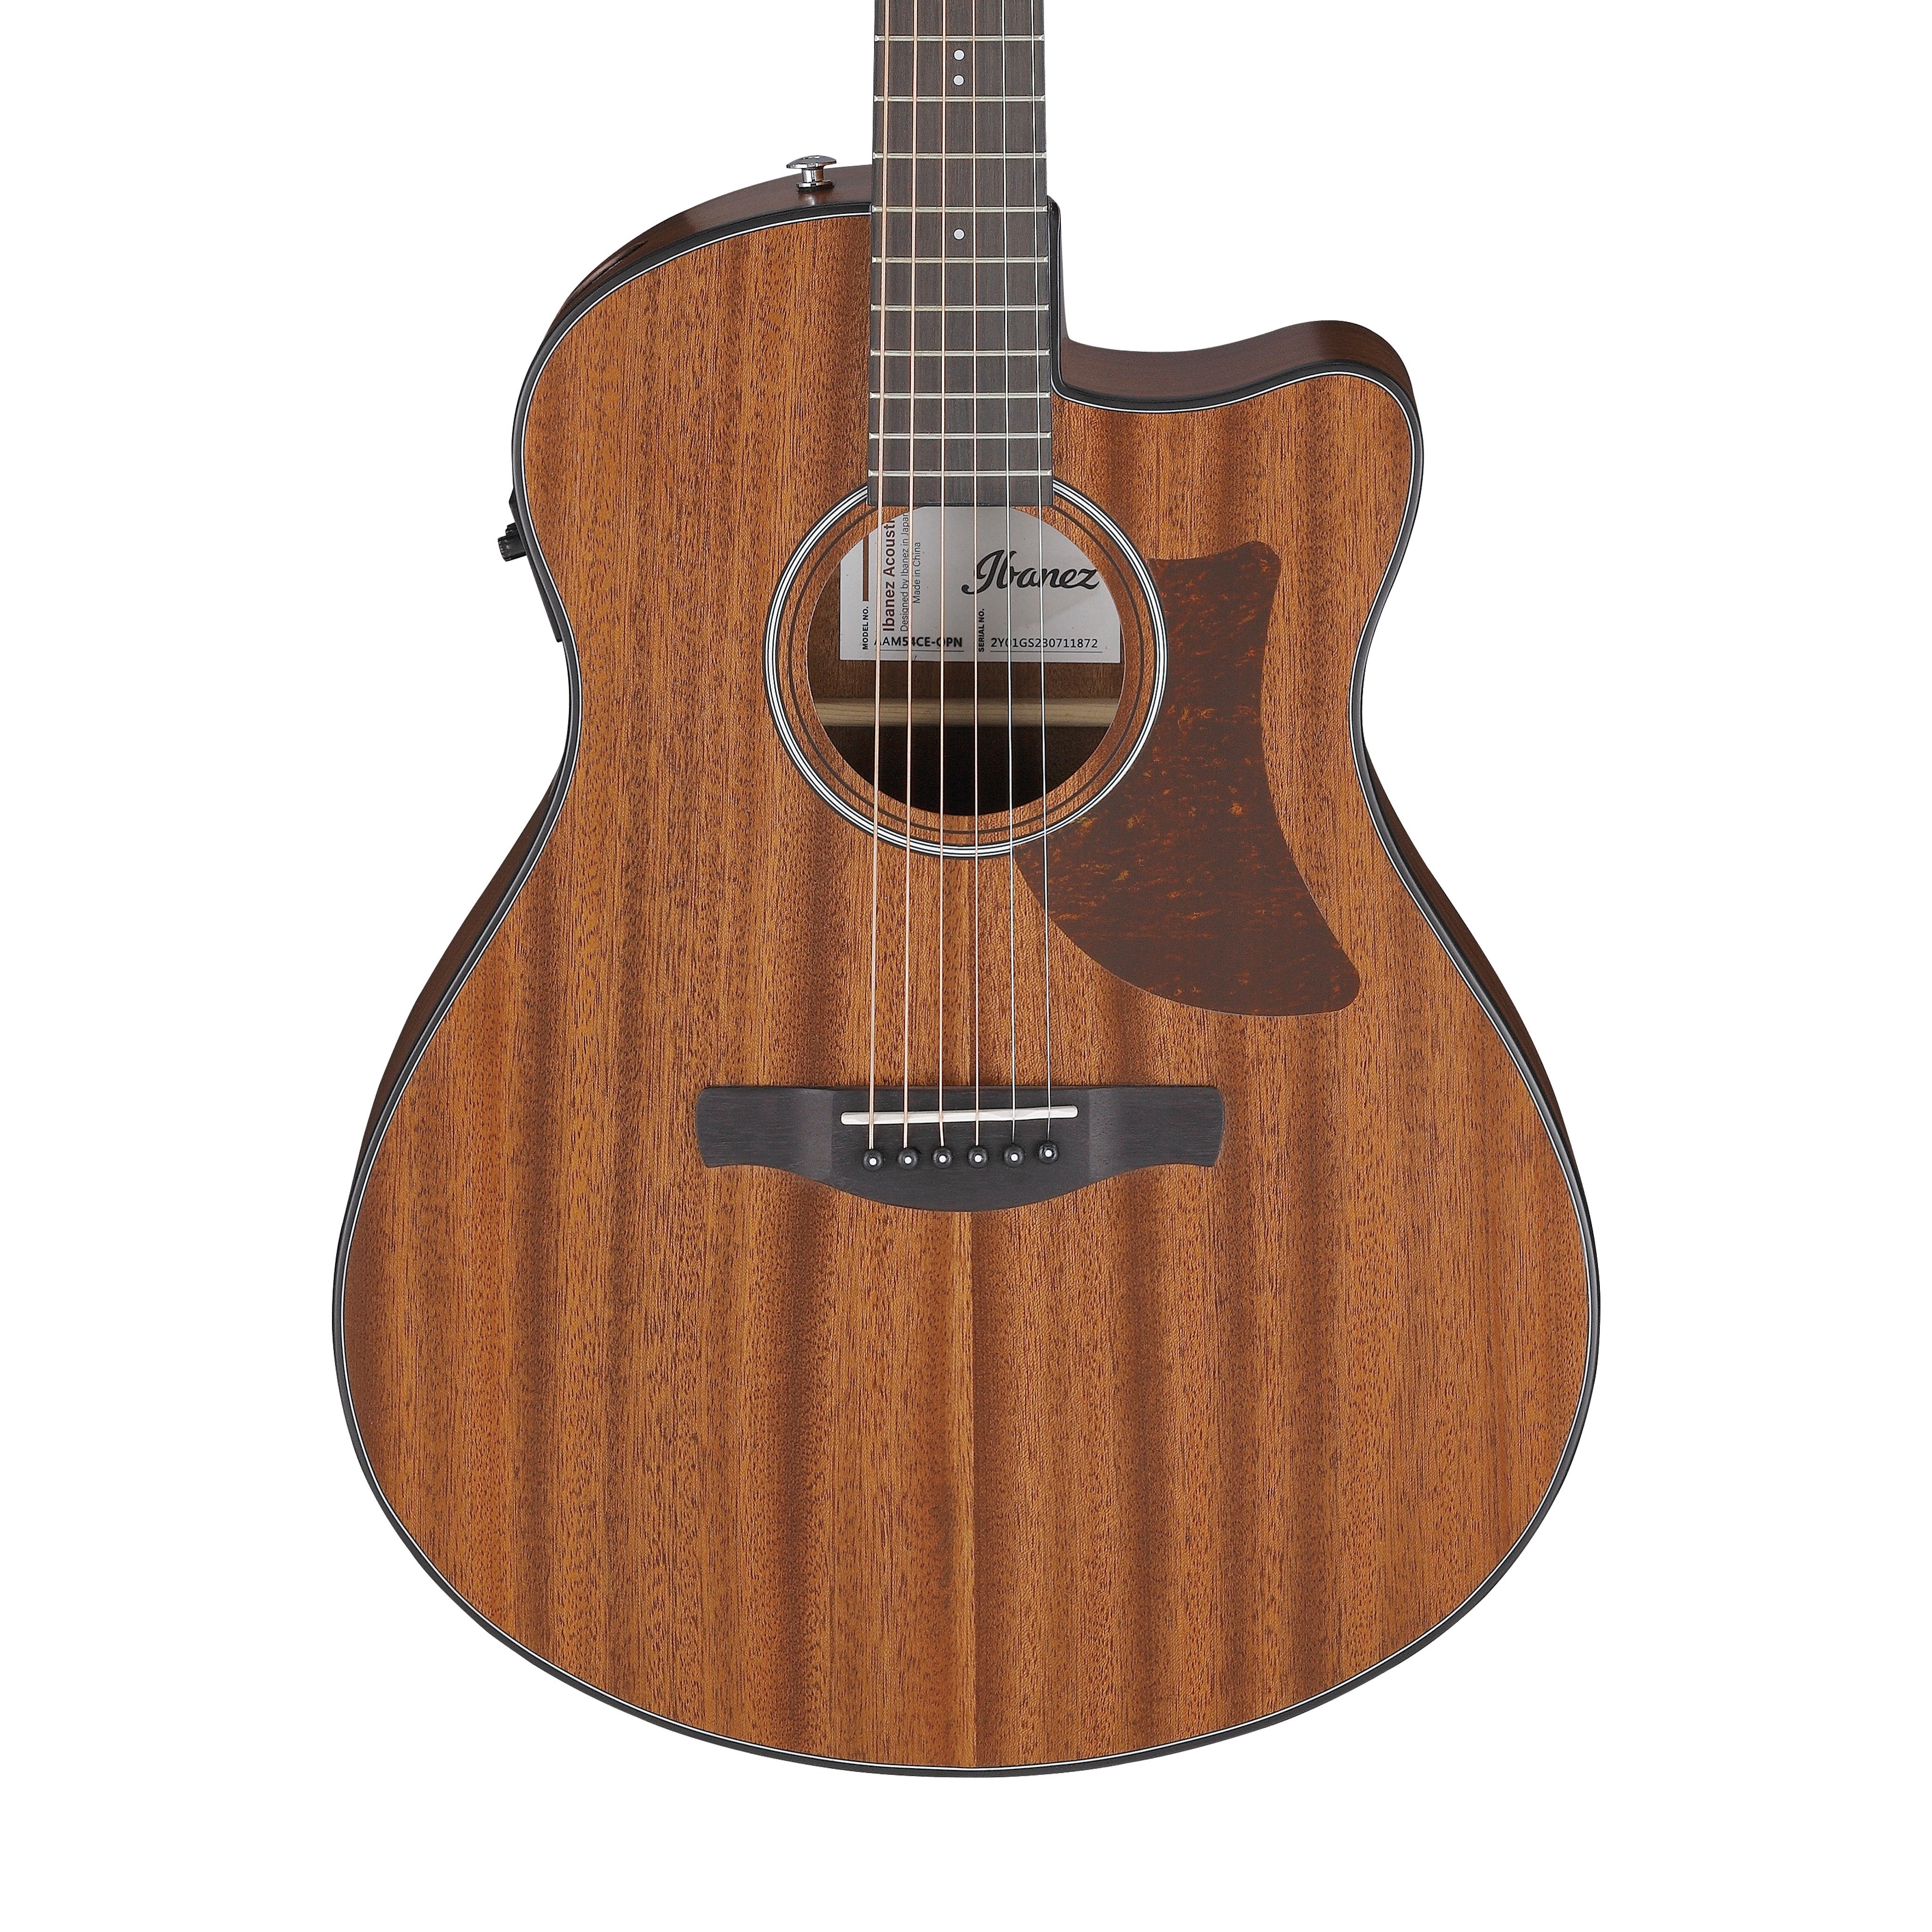 Ibanez AAM54CE Advanced Acoustic Auditorium Acoustic-electric Guitar - Natural | Zoso Music Sdn Bhd